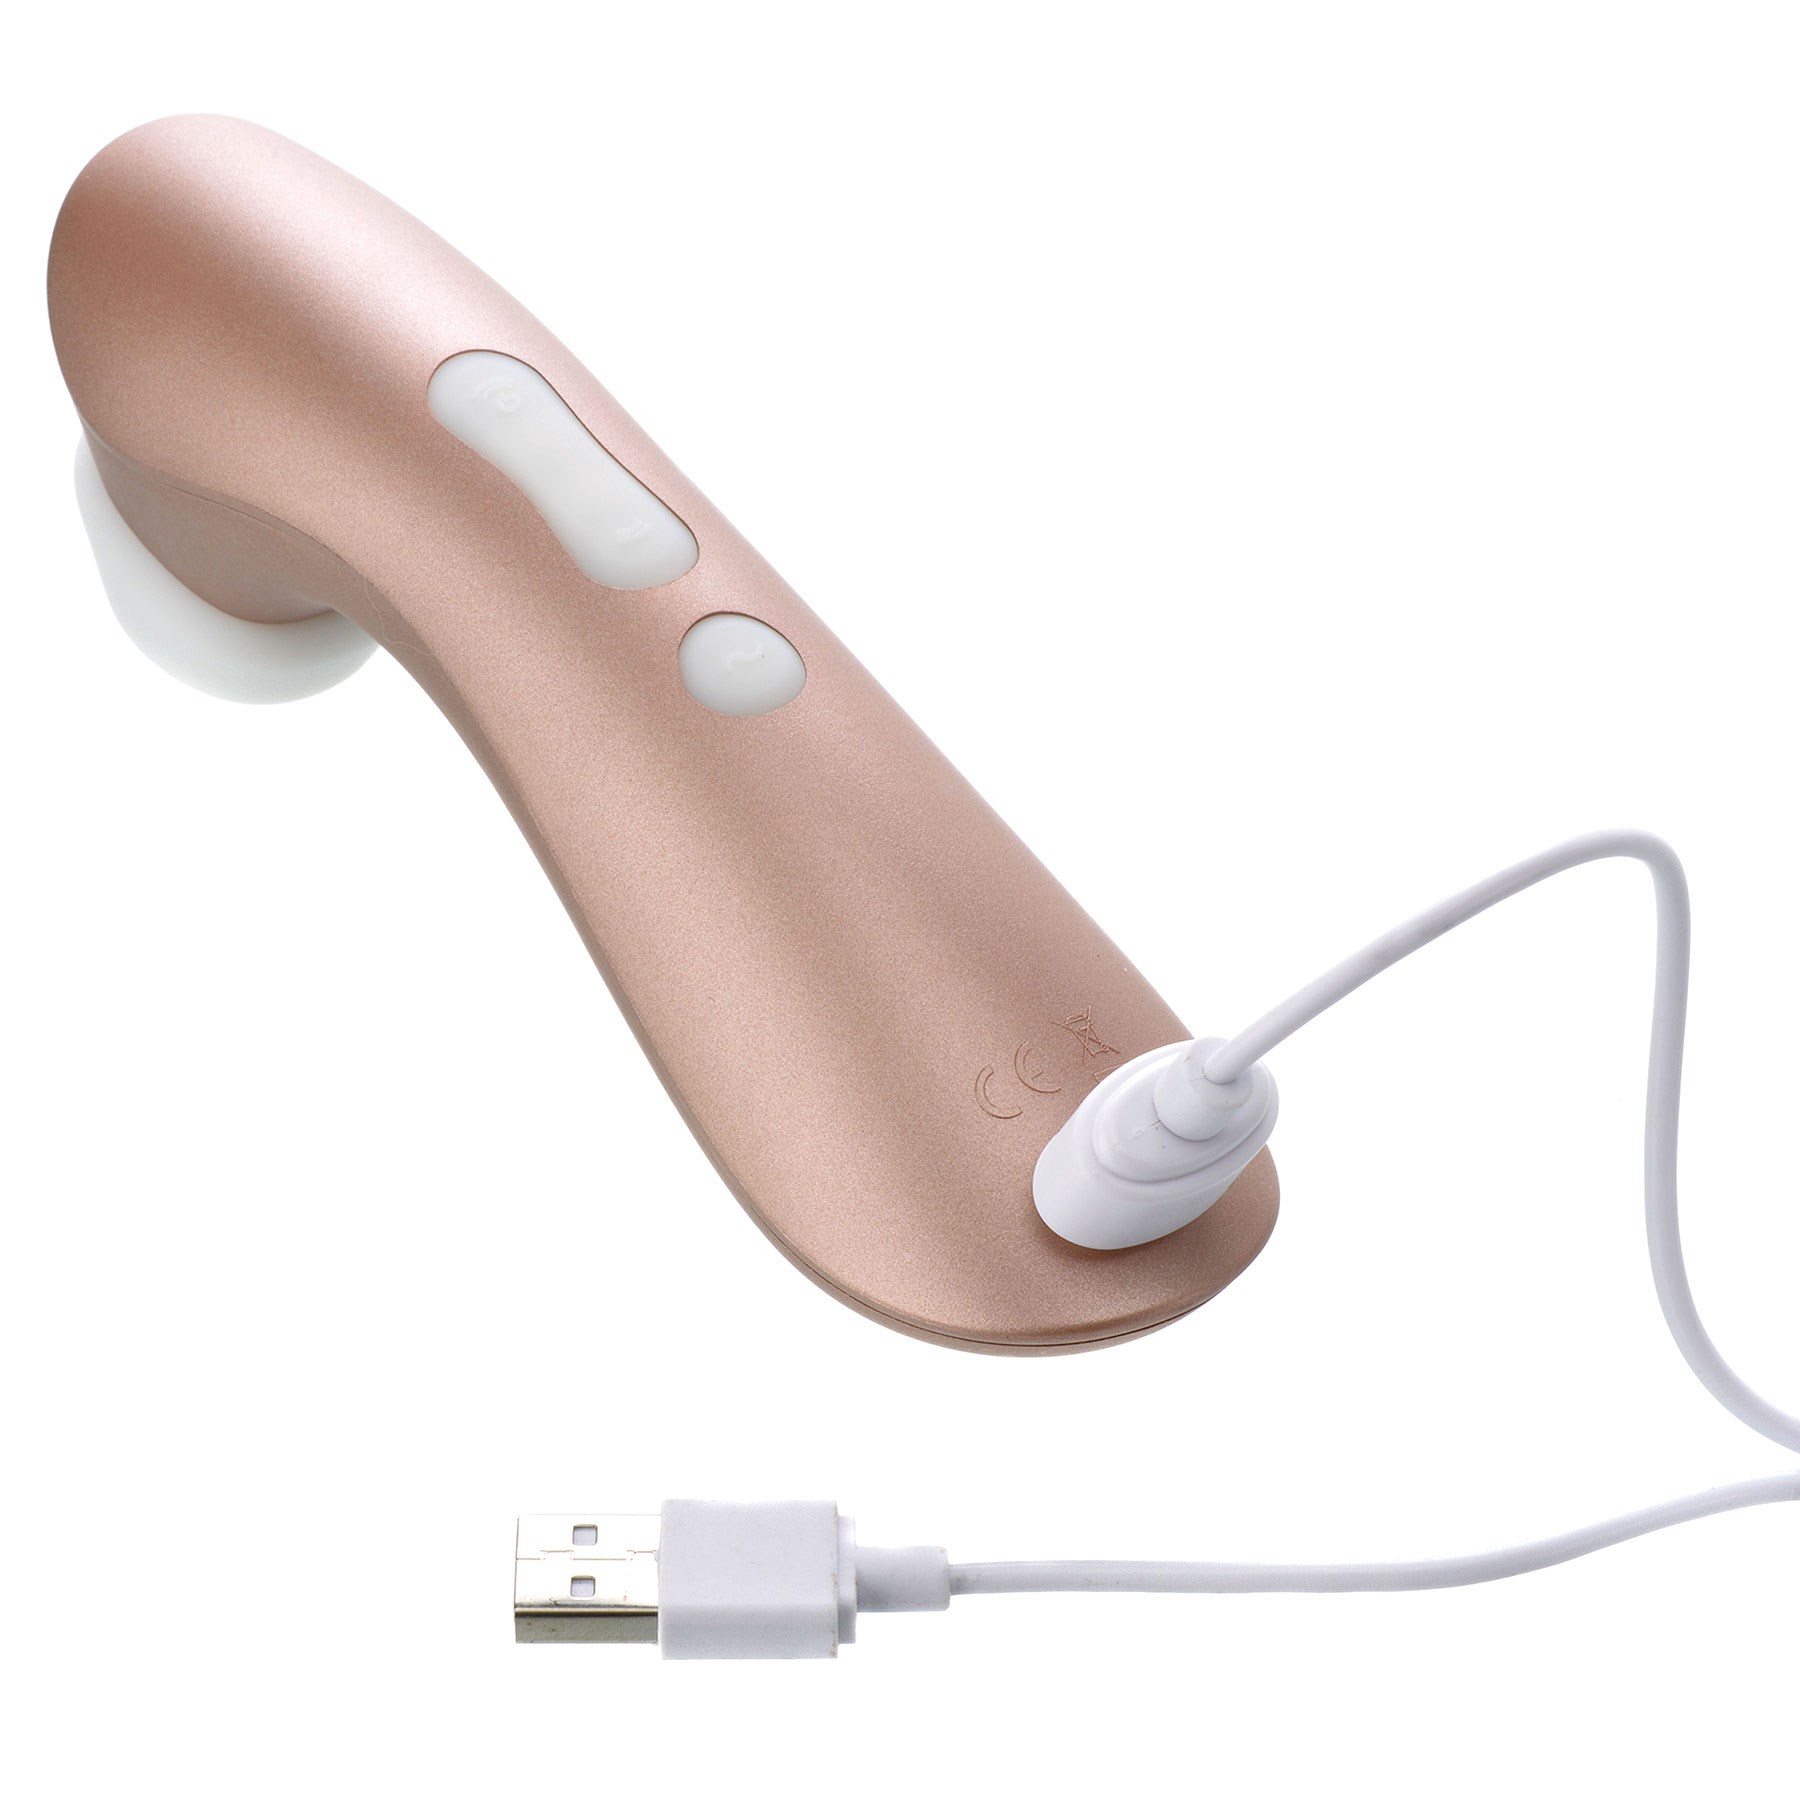 Satisfyer Pro 2 Plus Vibration - Showing Where Charging Cable is Placed